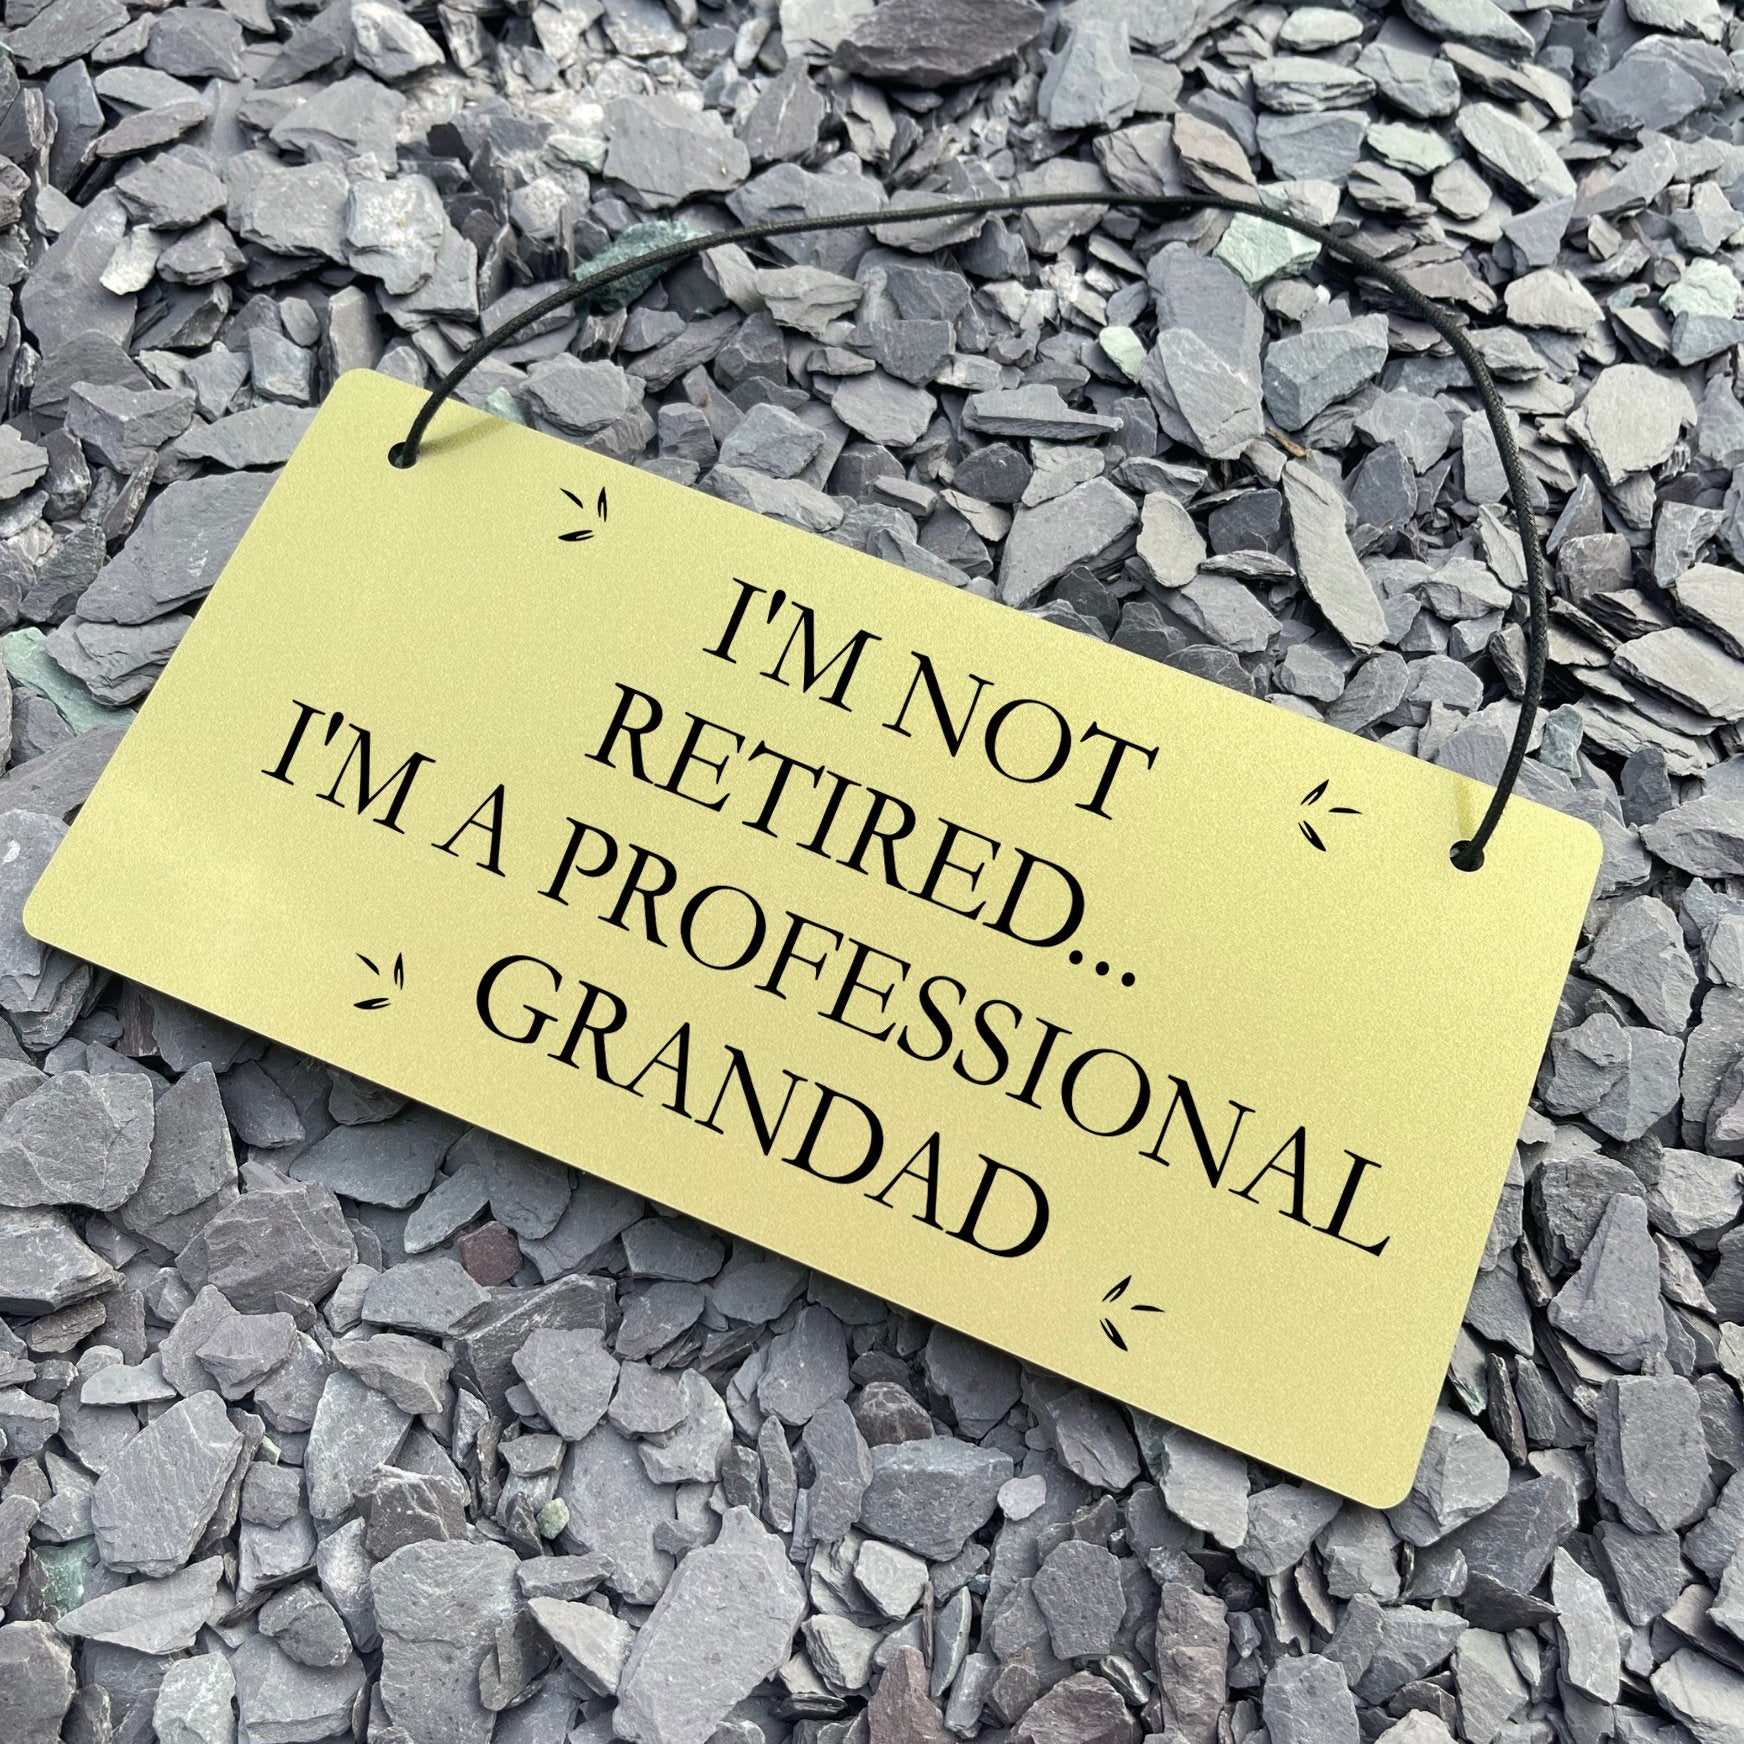 Personalised Engraved Sign for Grandads in Stunning Gold Color - Custom Acrylic Sign with Durable Engraving